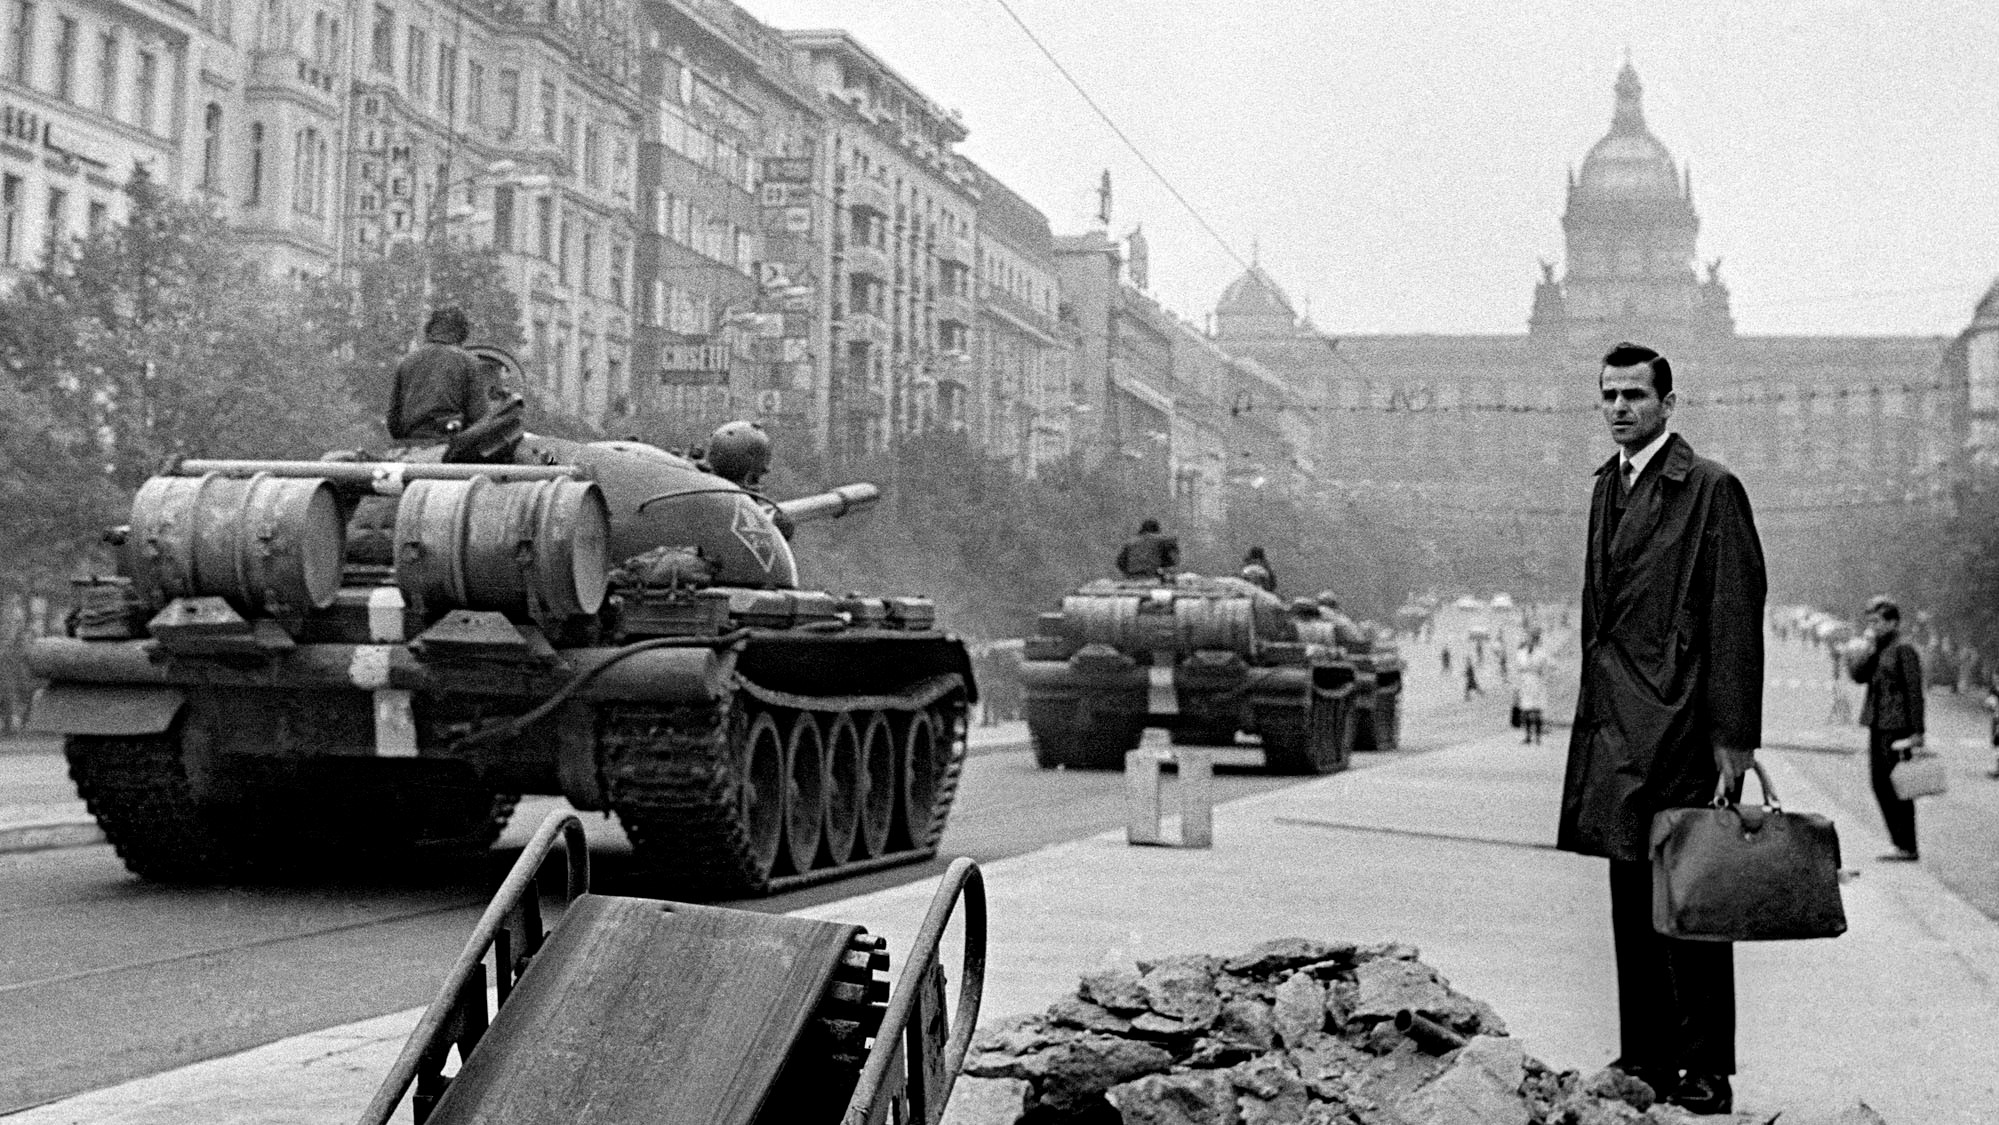 Warsaw Pact tanks on the streets of Prague in 1968.